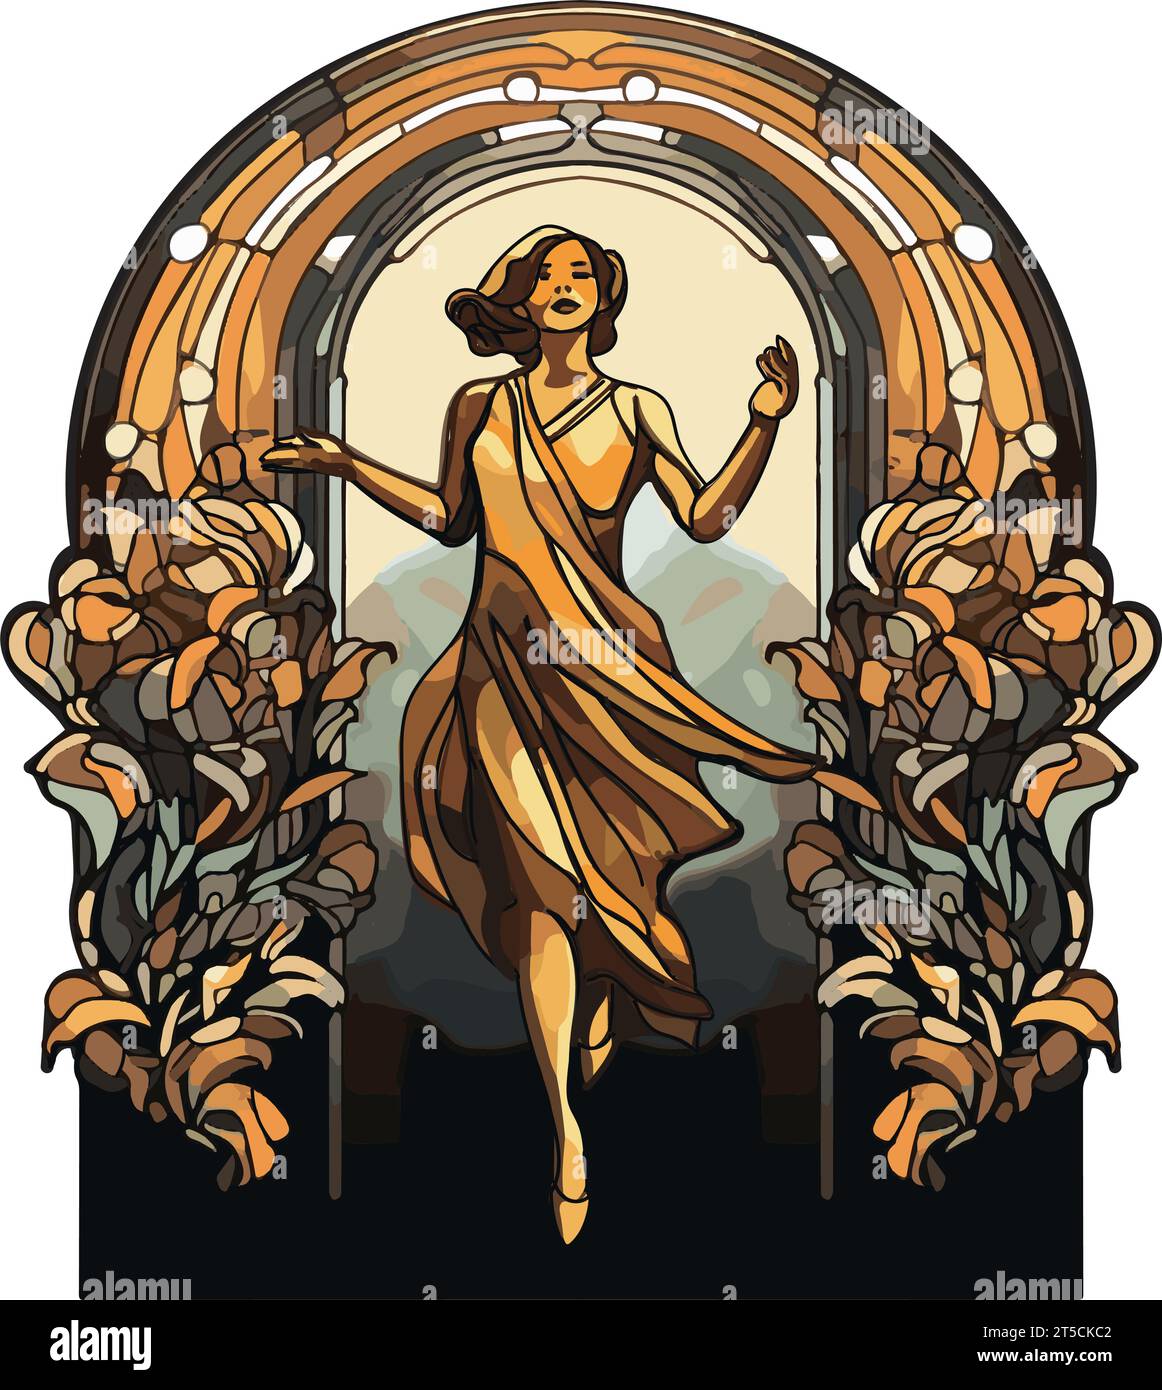 Leaf arch stained glass window with woman in 1920s style dress running through opening, mountain scene in background, yellow and gold tones Stock Vector